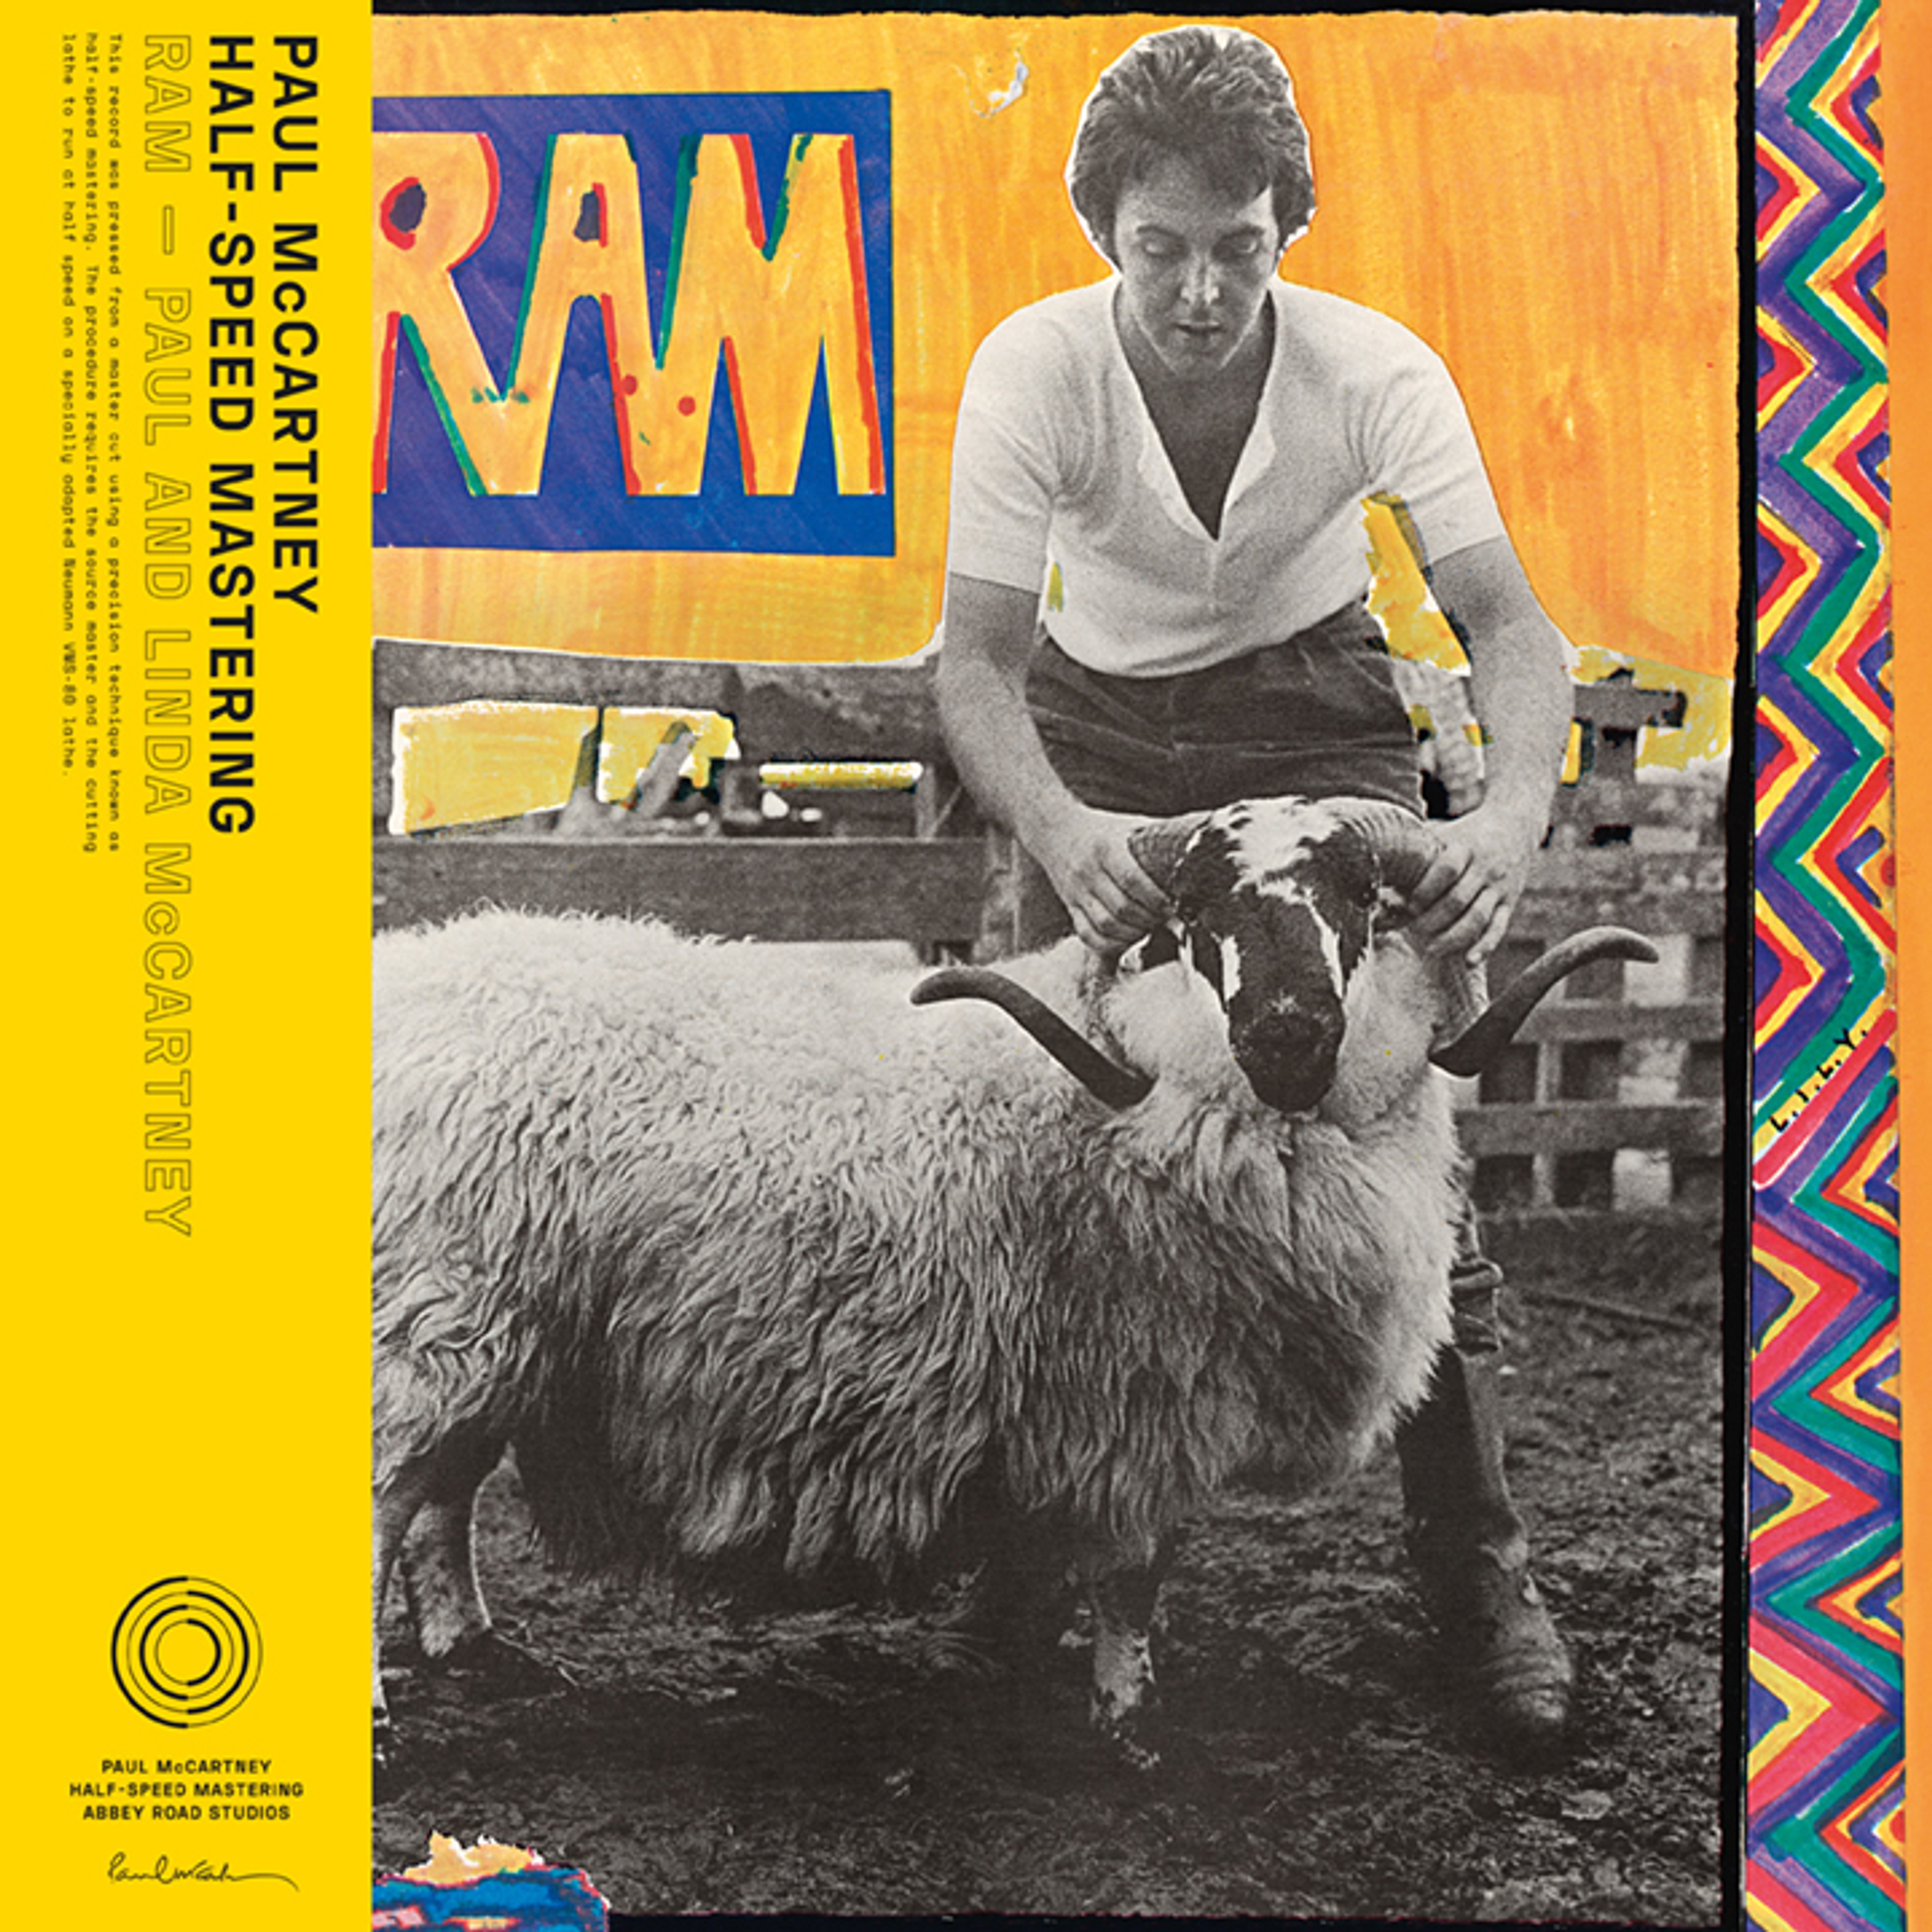 Cover of the 50th Anniversary Half-Speed Mastering release of 'RAM'